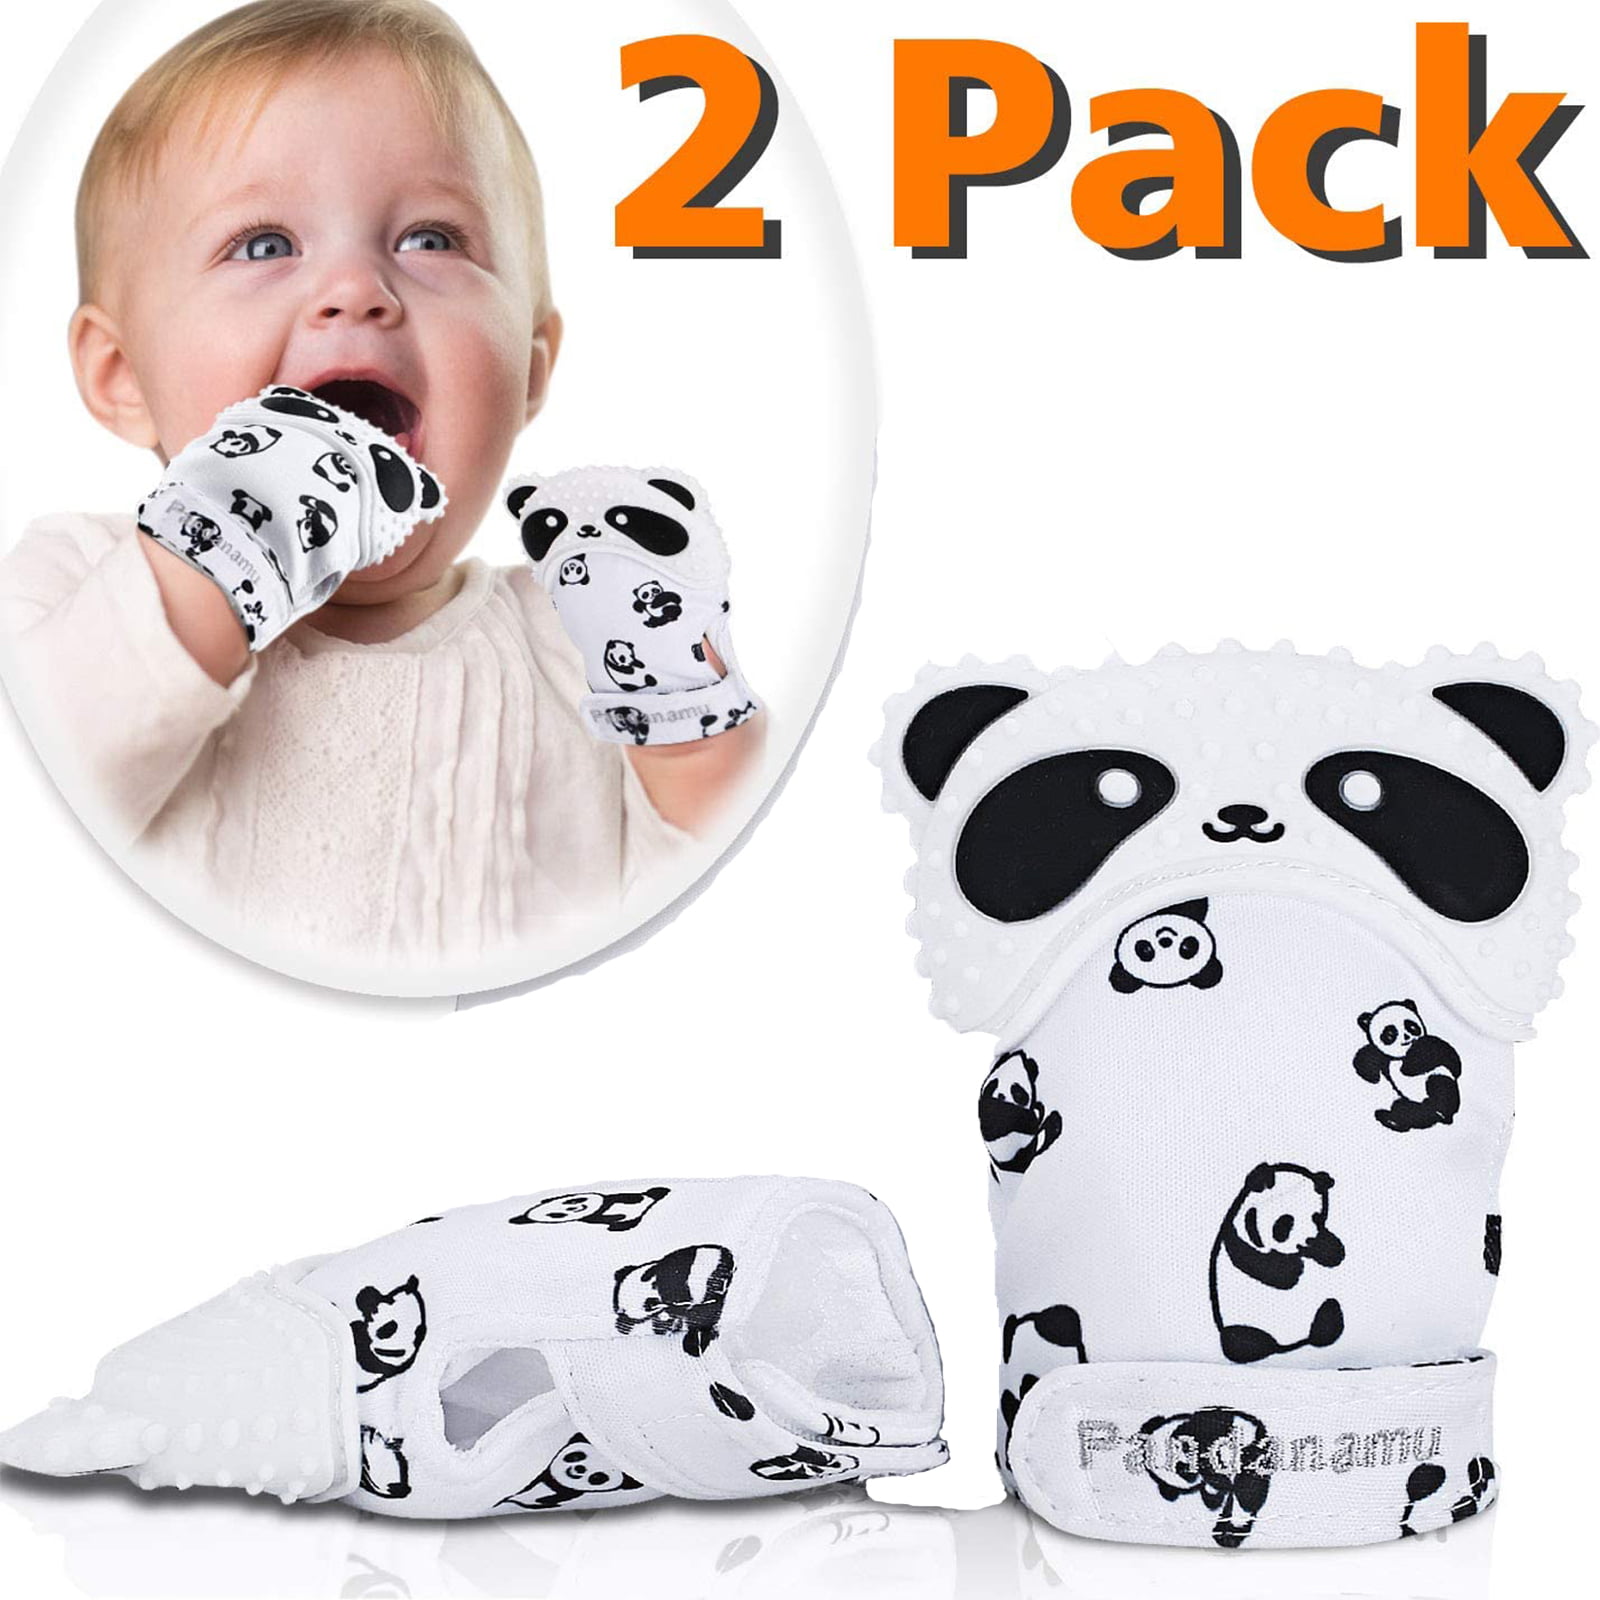 Kitchen Tools & Gadgets Kitchen, Dining & Bar NEPAK 4 Pack Baby Teething  Mitt,Babies Glove Stimulating Teether Toys for Boys & HE1086437